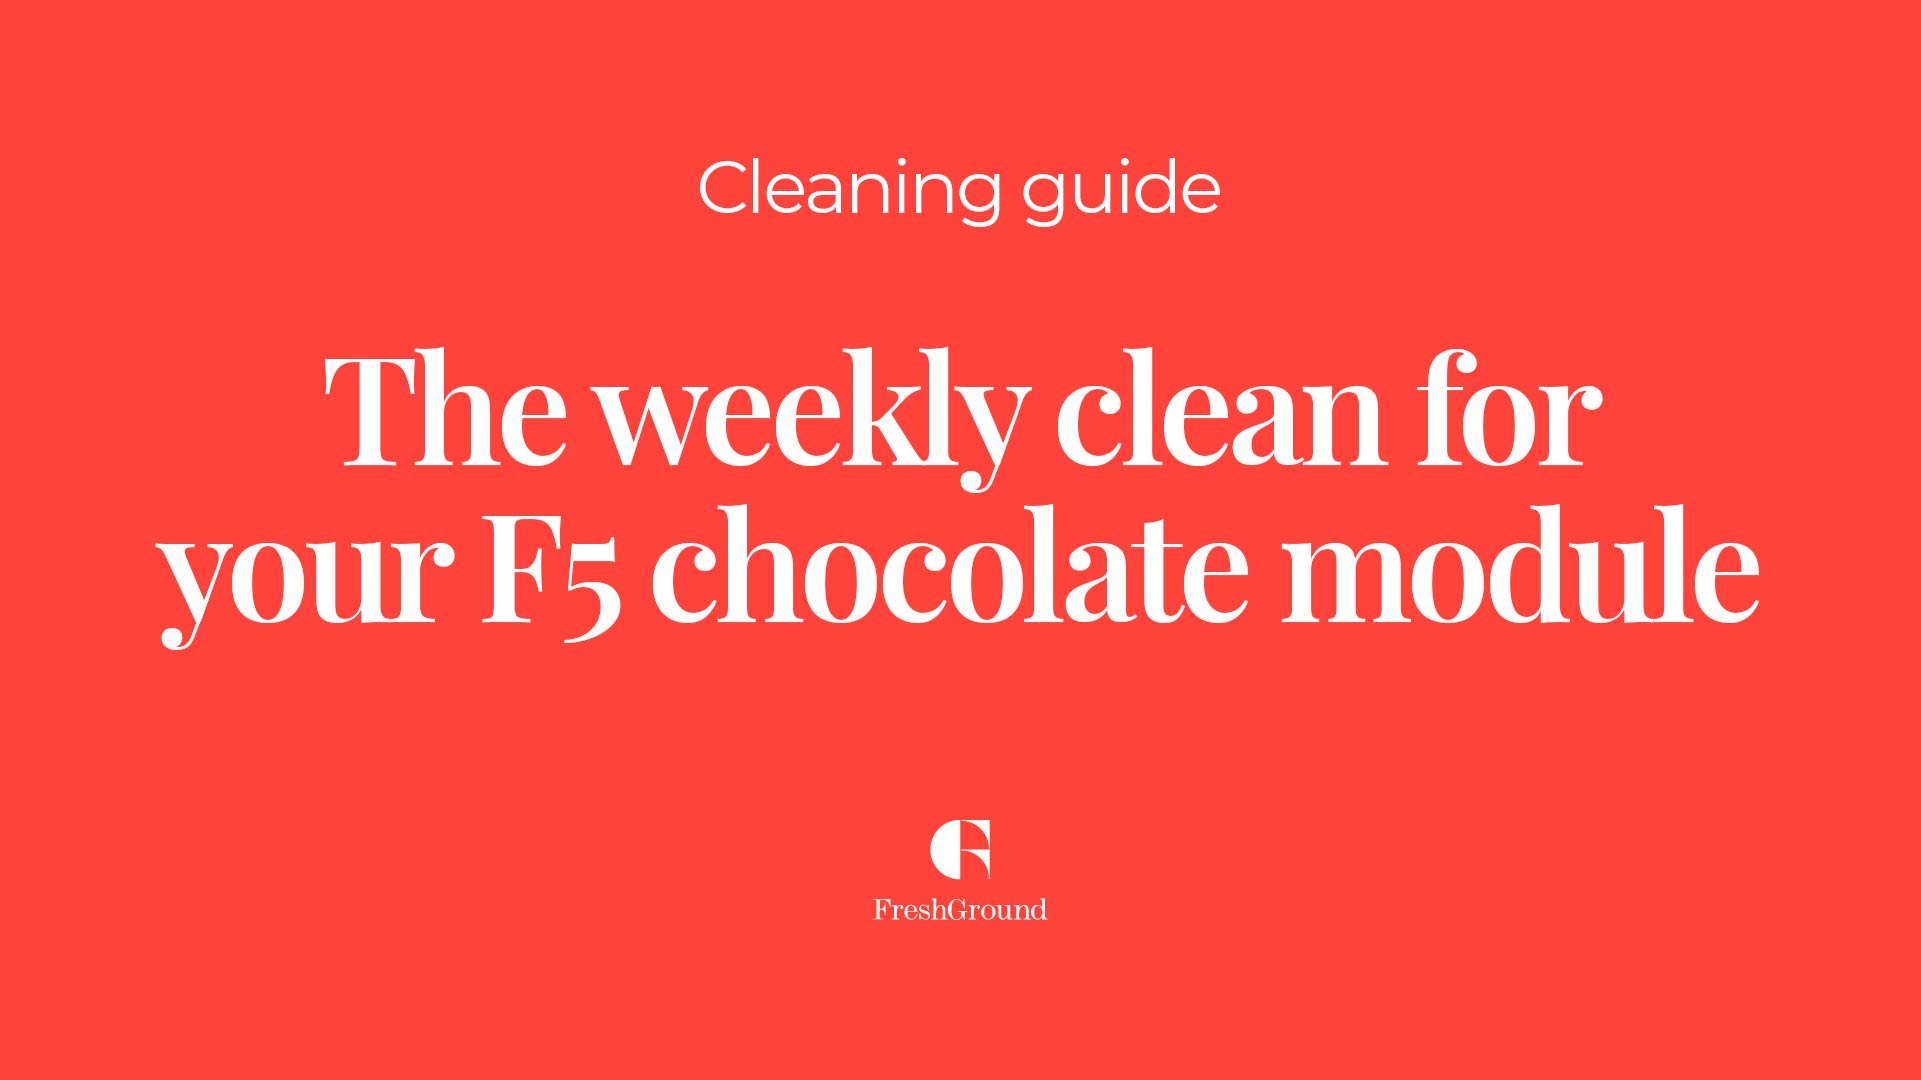 F5 chocolate module cleaning video title card